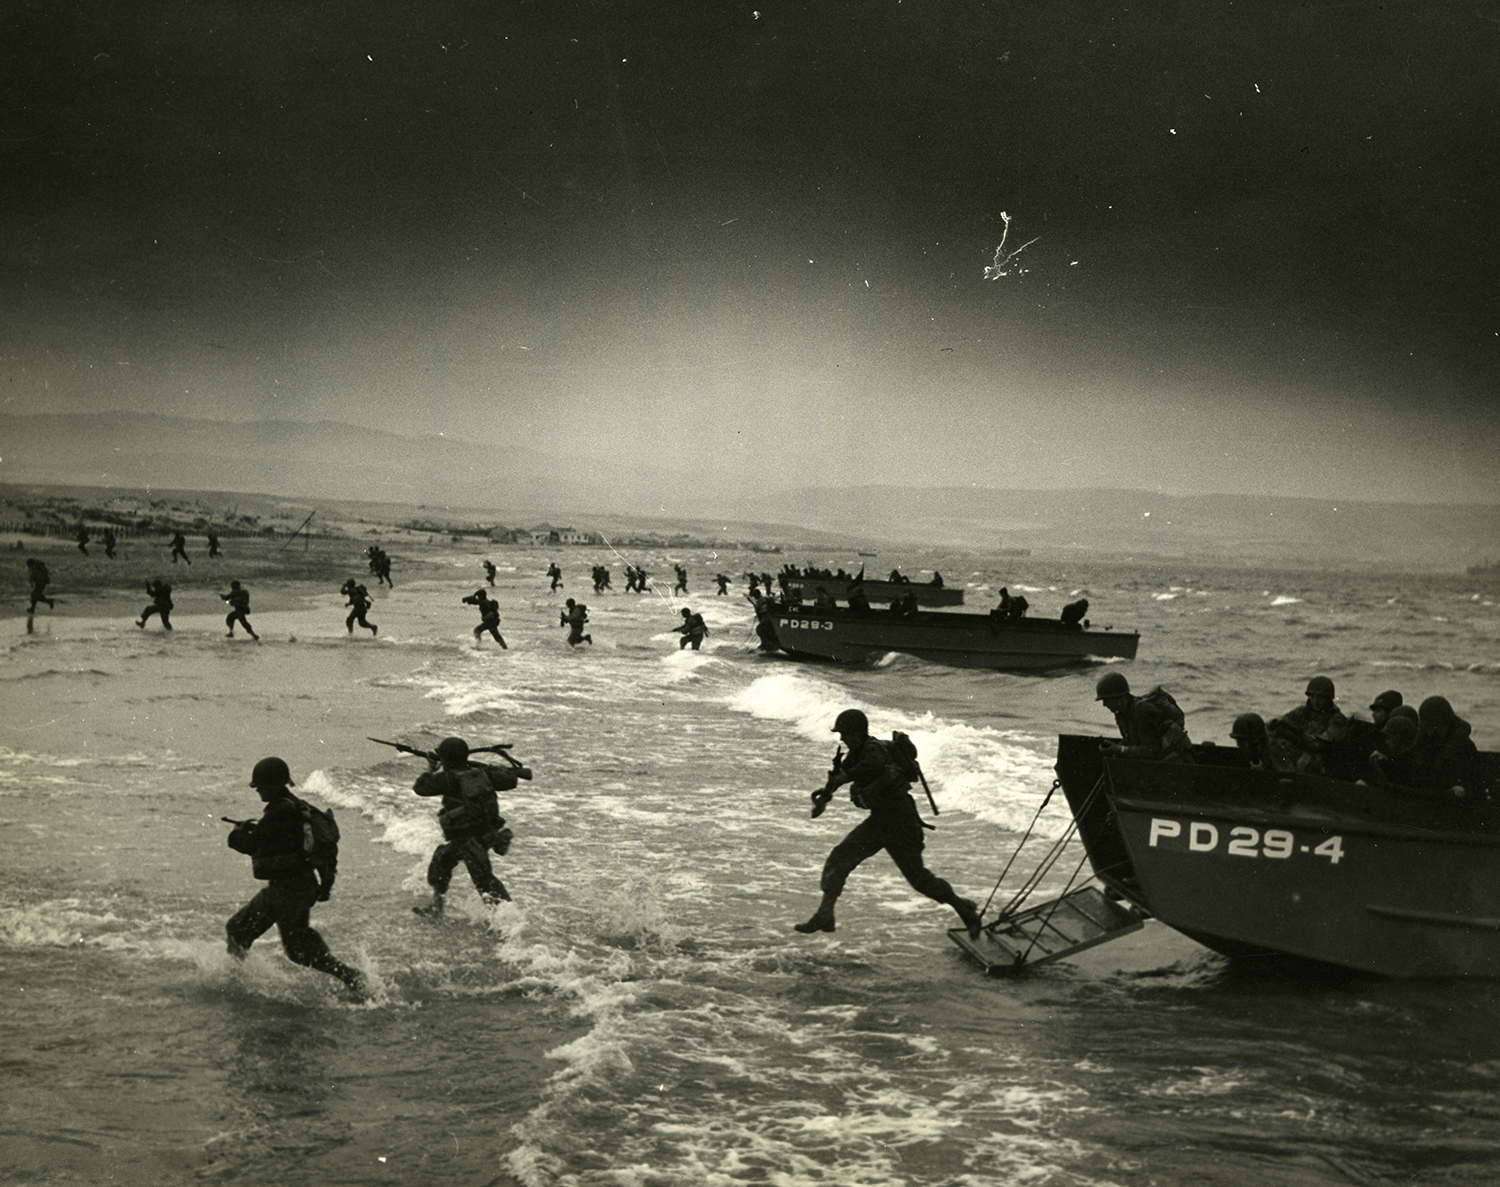 Soldiers run onshore from a boat during WWII